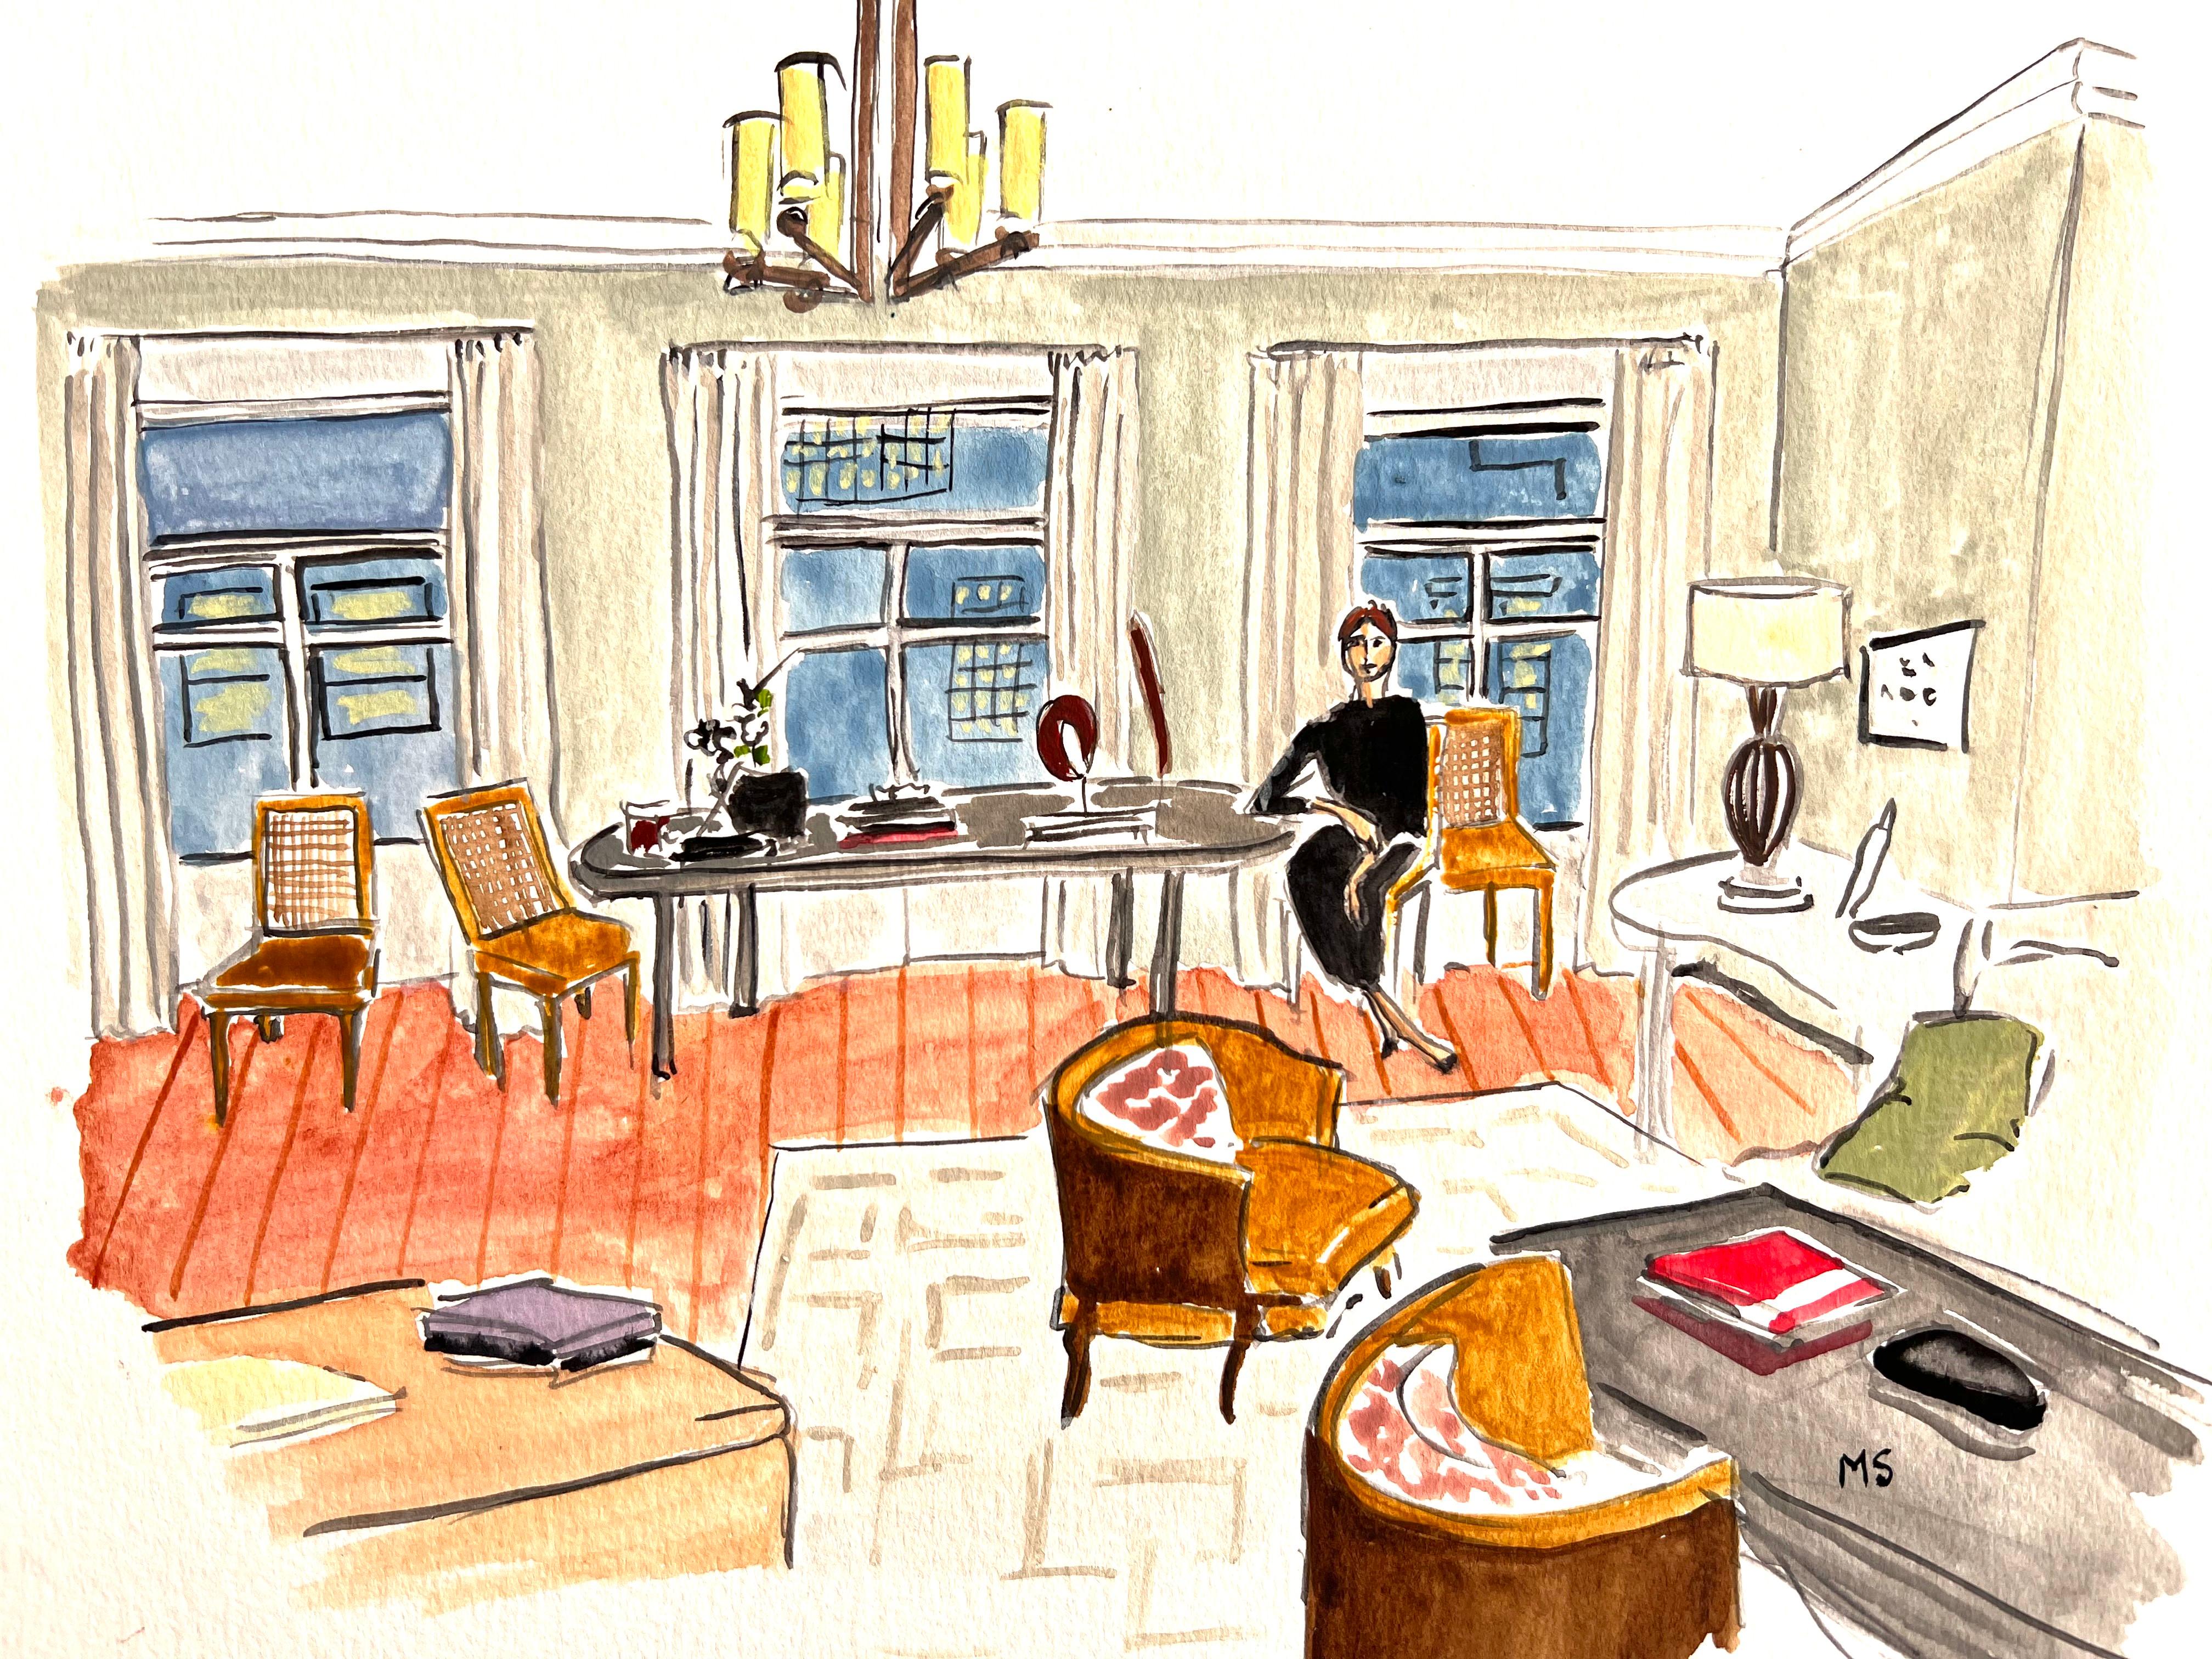 Interior designer Sandra Nunnerley at home. Ink and watercolor interiors - Art by Manuel Santelices